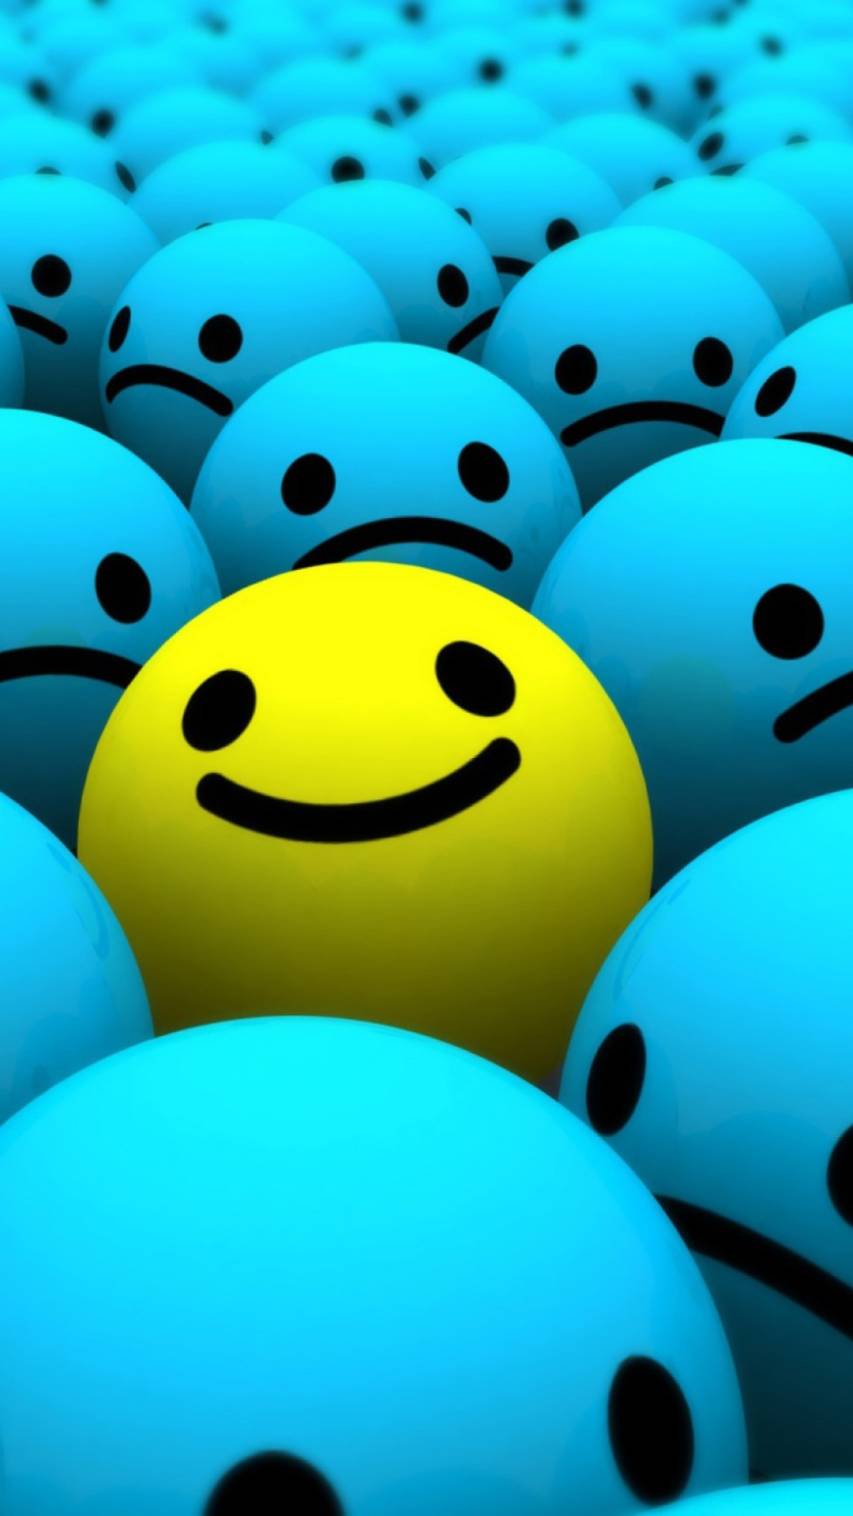 Awesome Smiley faces Wallpaper